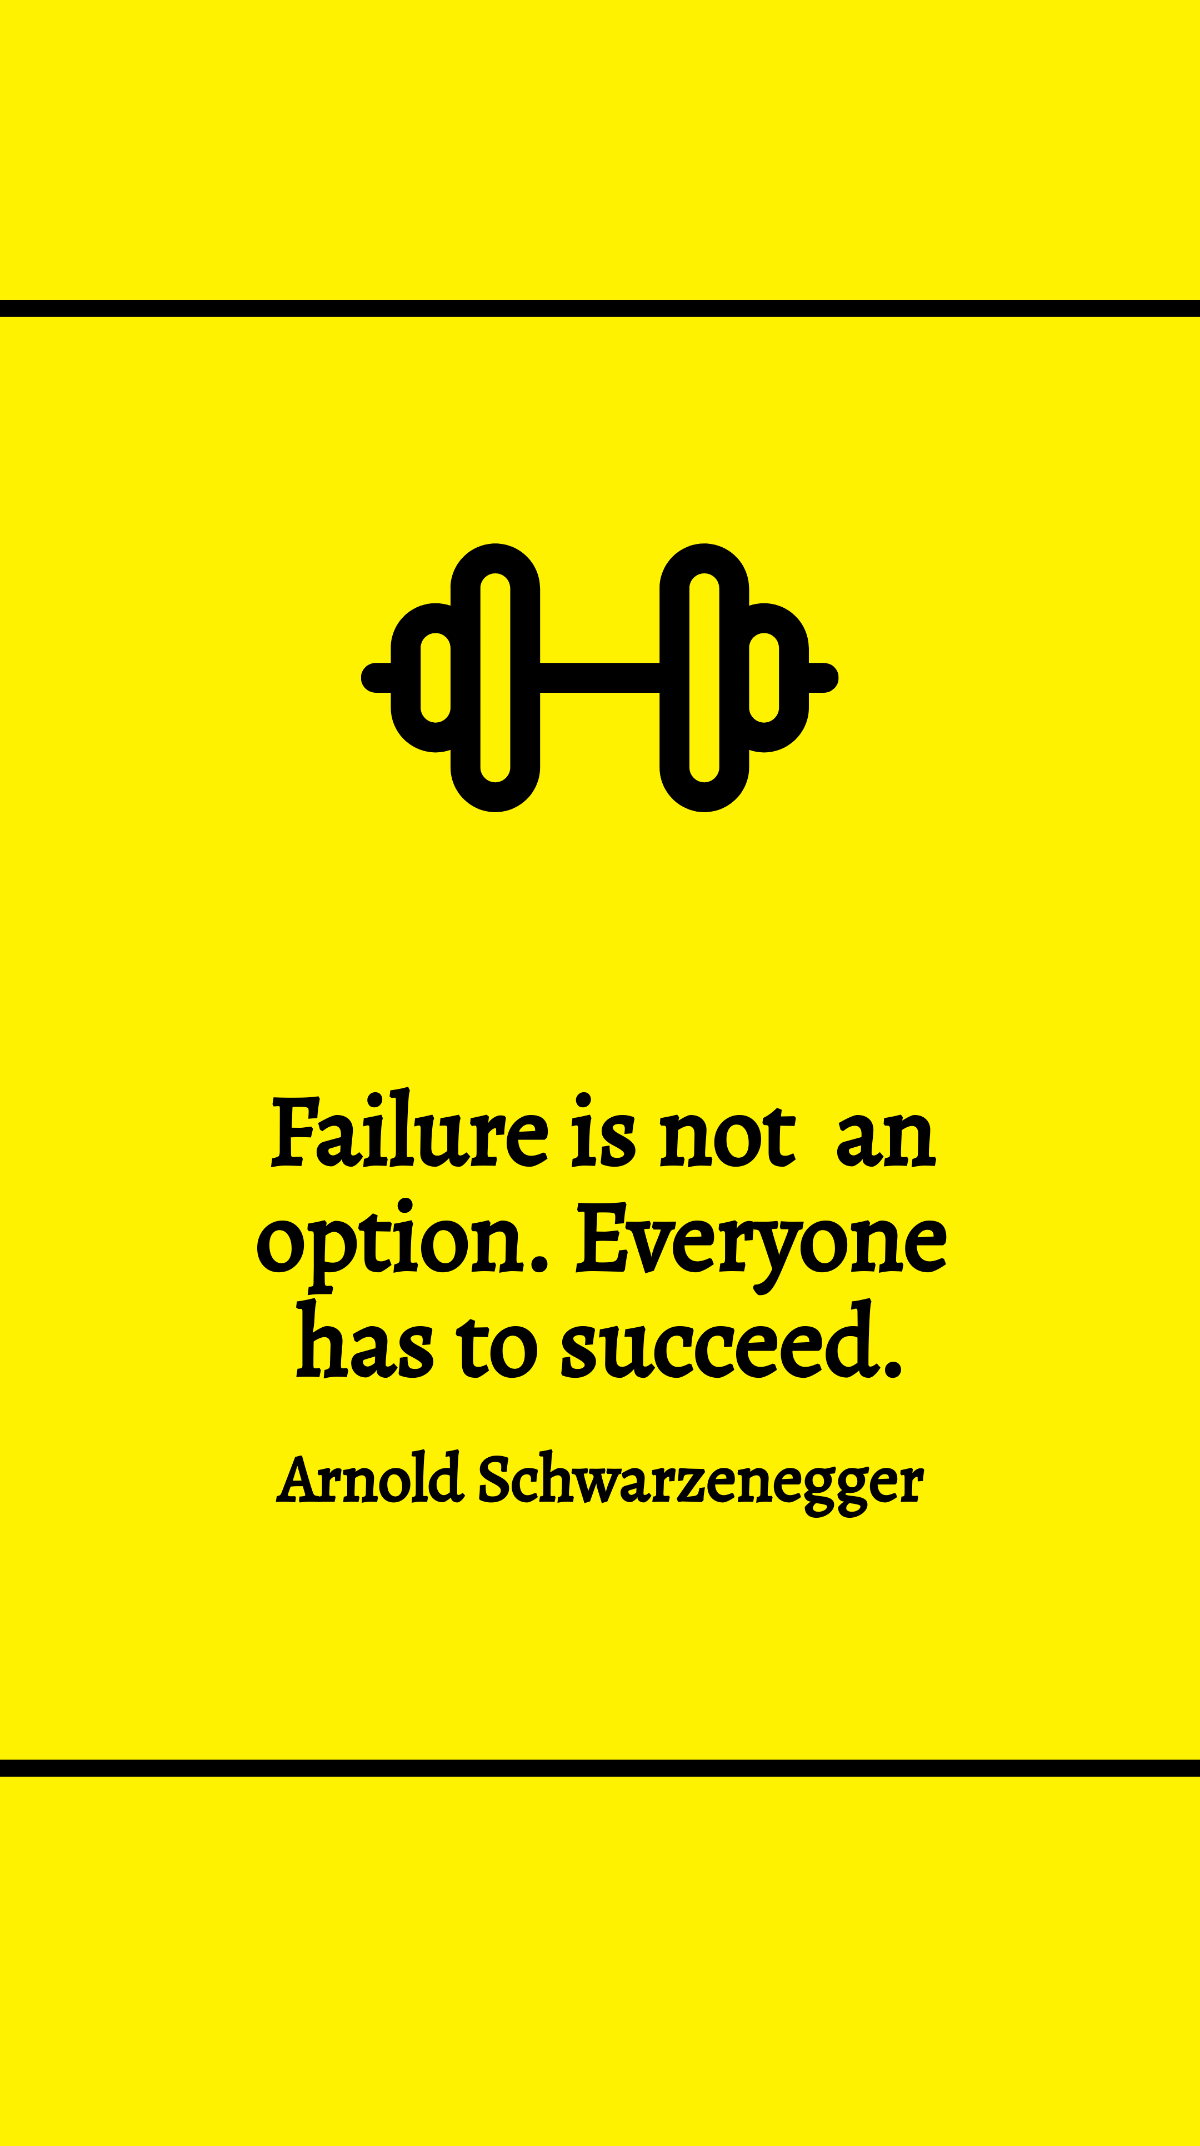 Free Arnold Schwarzenegger - Failure is not an option. Everyone has to succeed. Template